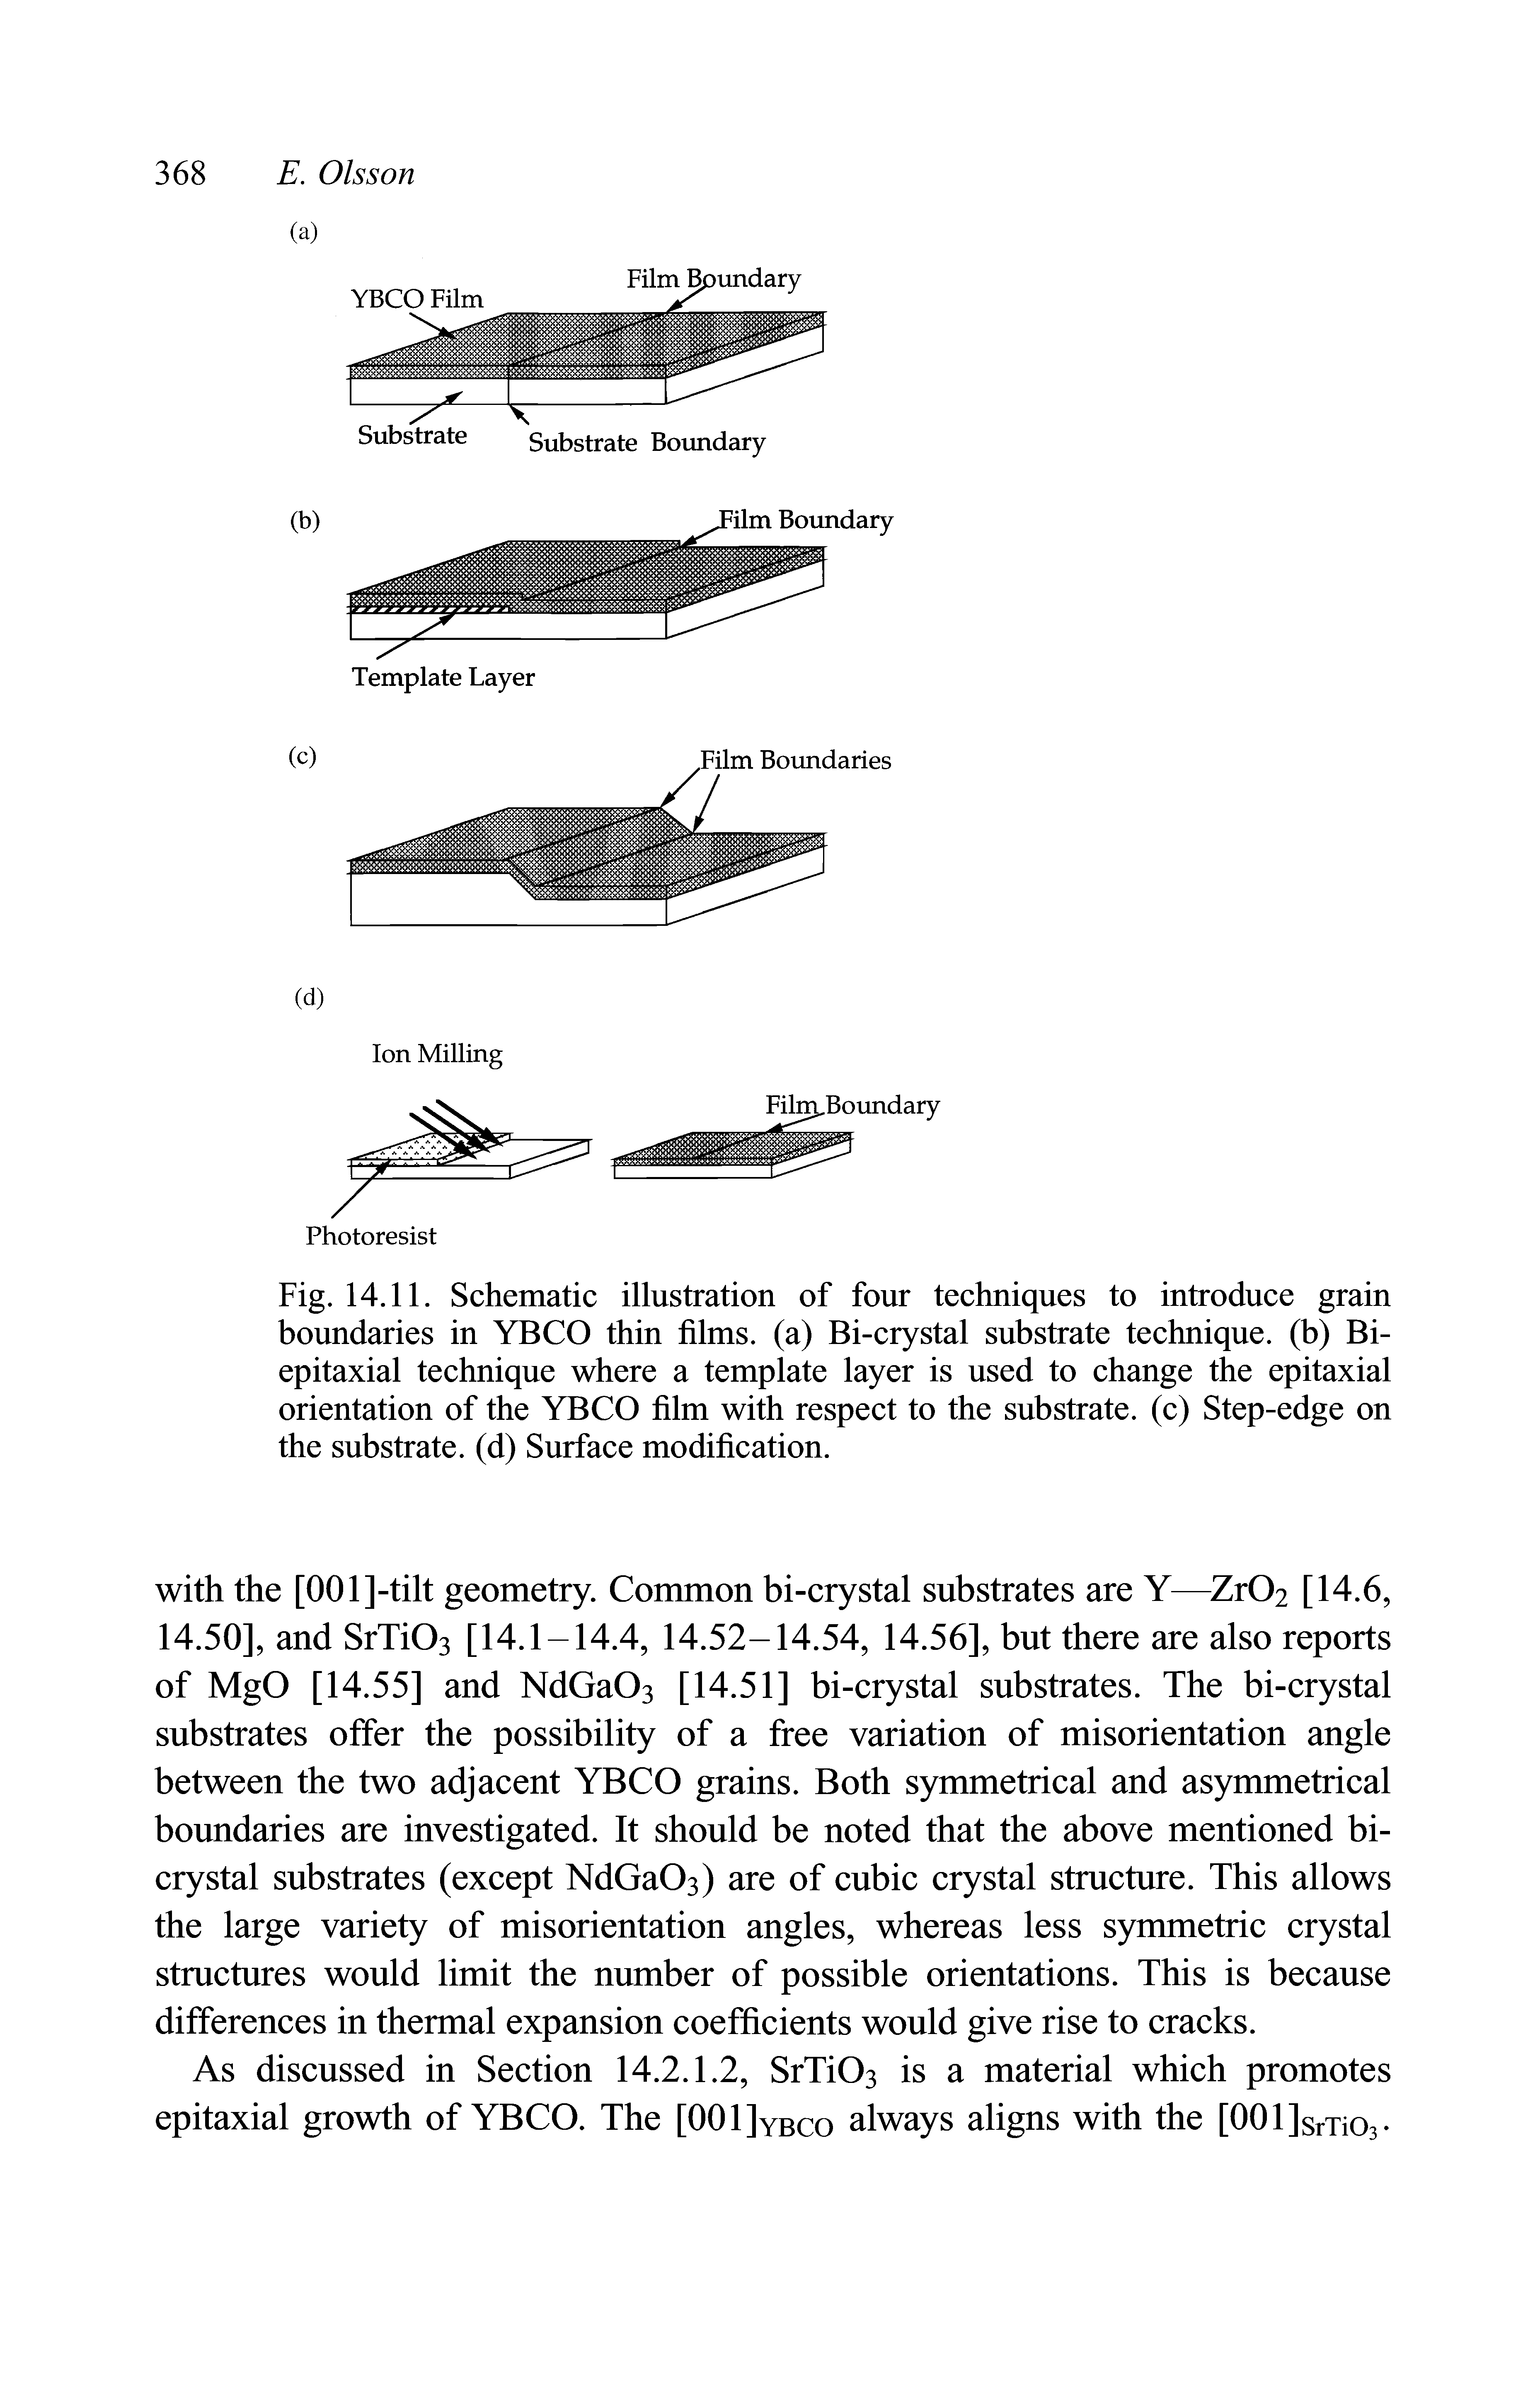 Fig. 14.11. Schematic illustration of four techniques to introduce grain boundaries in YBCO thin films, (a) Bi-crystal substrate technique, (b) Bi-epitaxial technique where a template layer is used to change the epitaxial orientation of the YBCO film with respect to the substrate, (c) Step-edge on the substrate, (d) Surface modification.